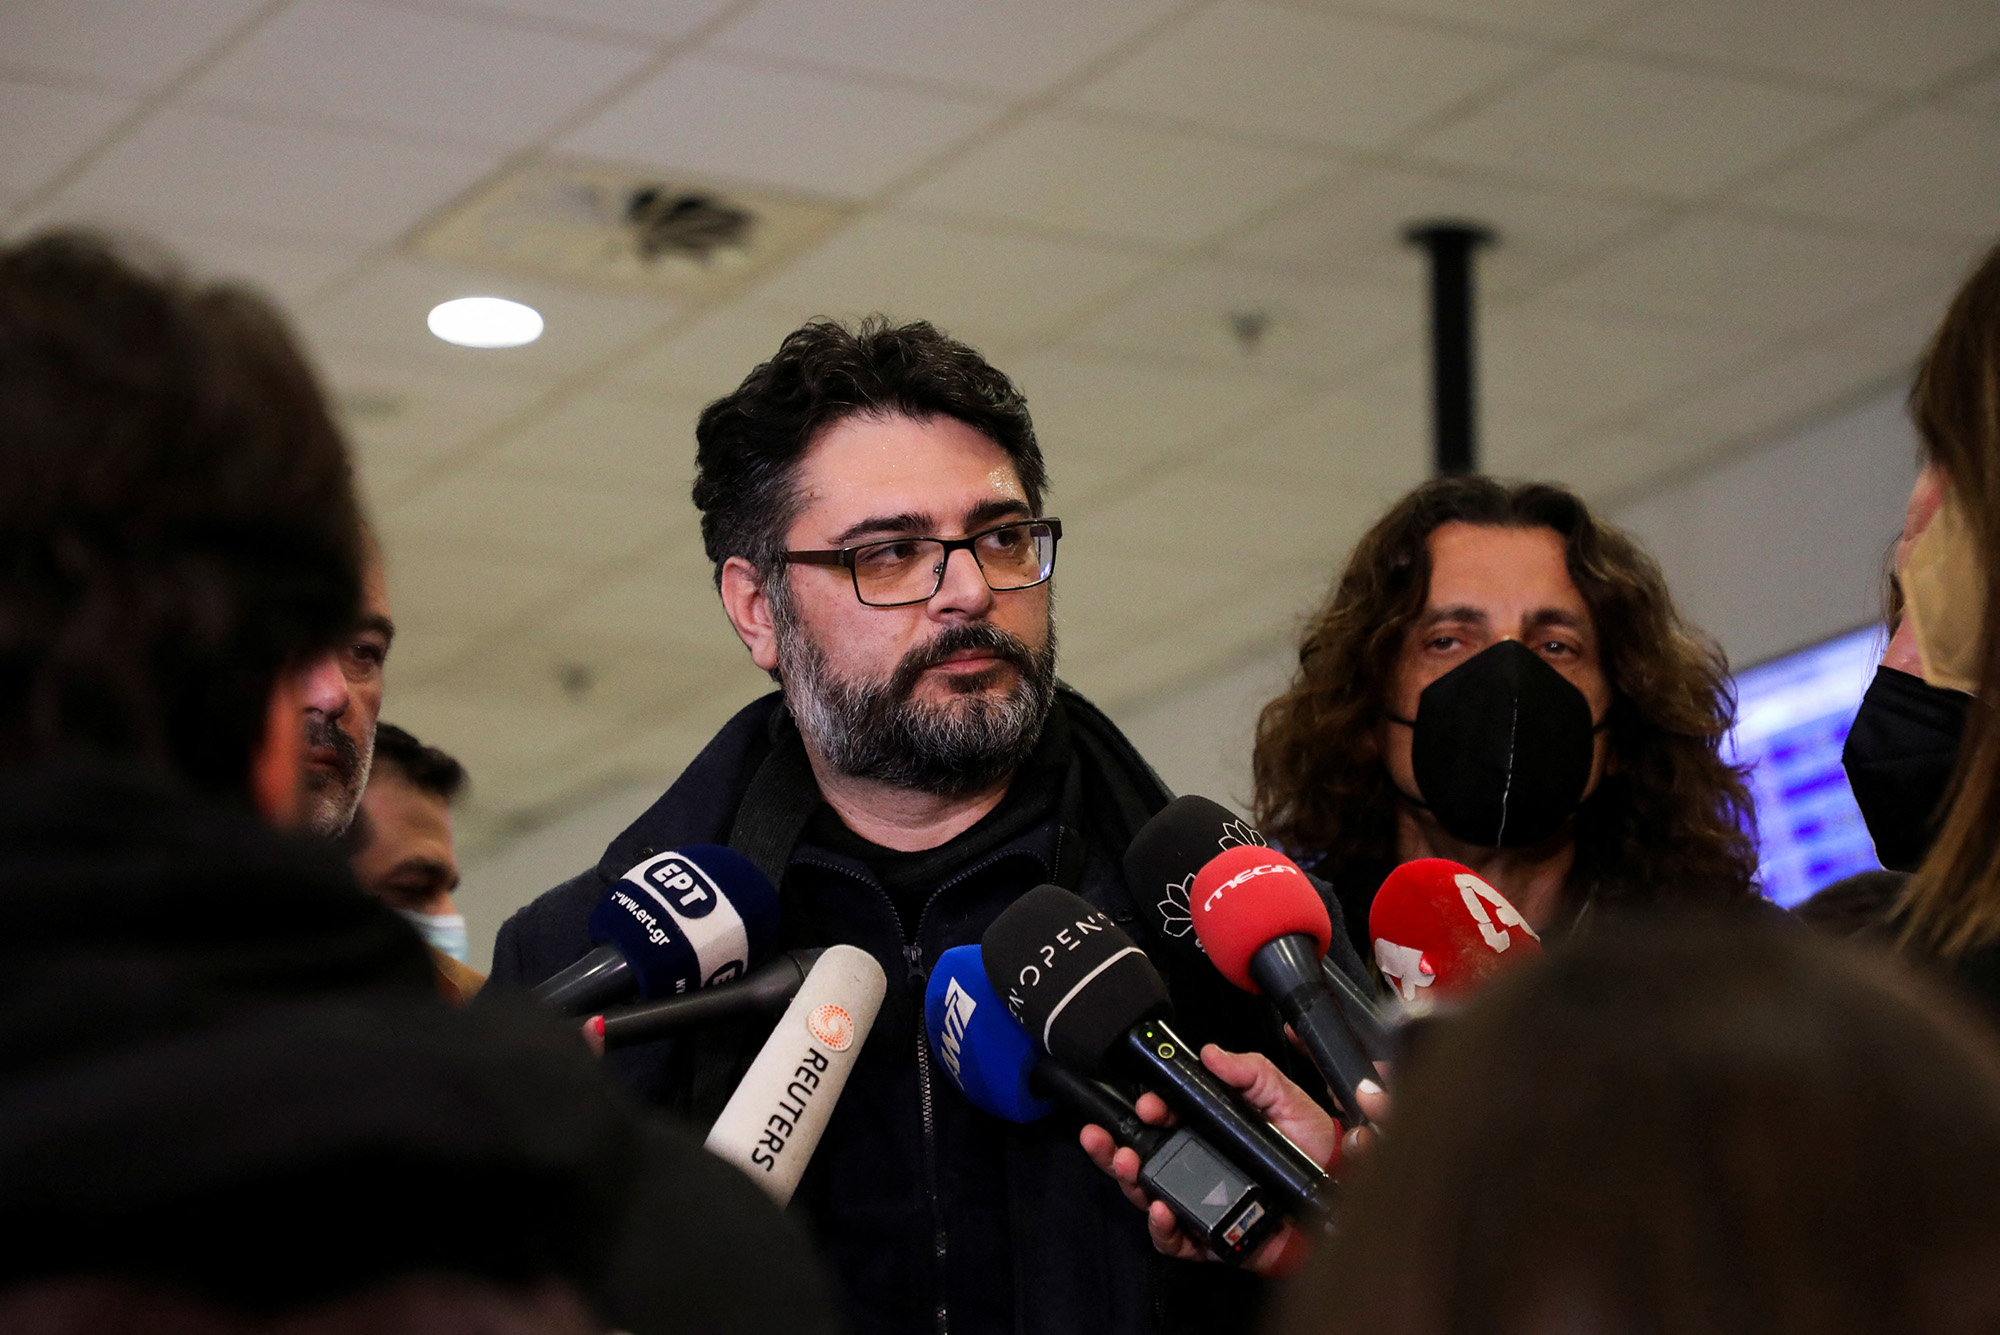 Greece's Consul General Manolis Androulakis, center, talks to the media after arriving back in Athens, Greece, on March 20 after evacuating the city of Mariupol, Ukraine.